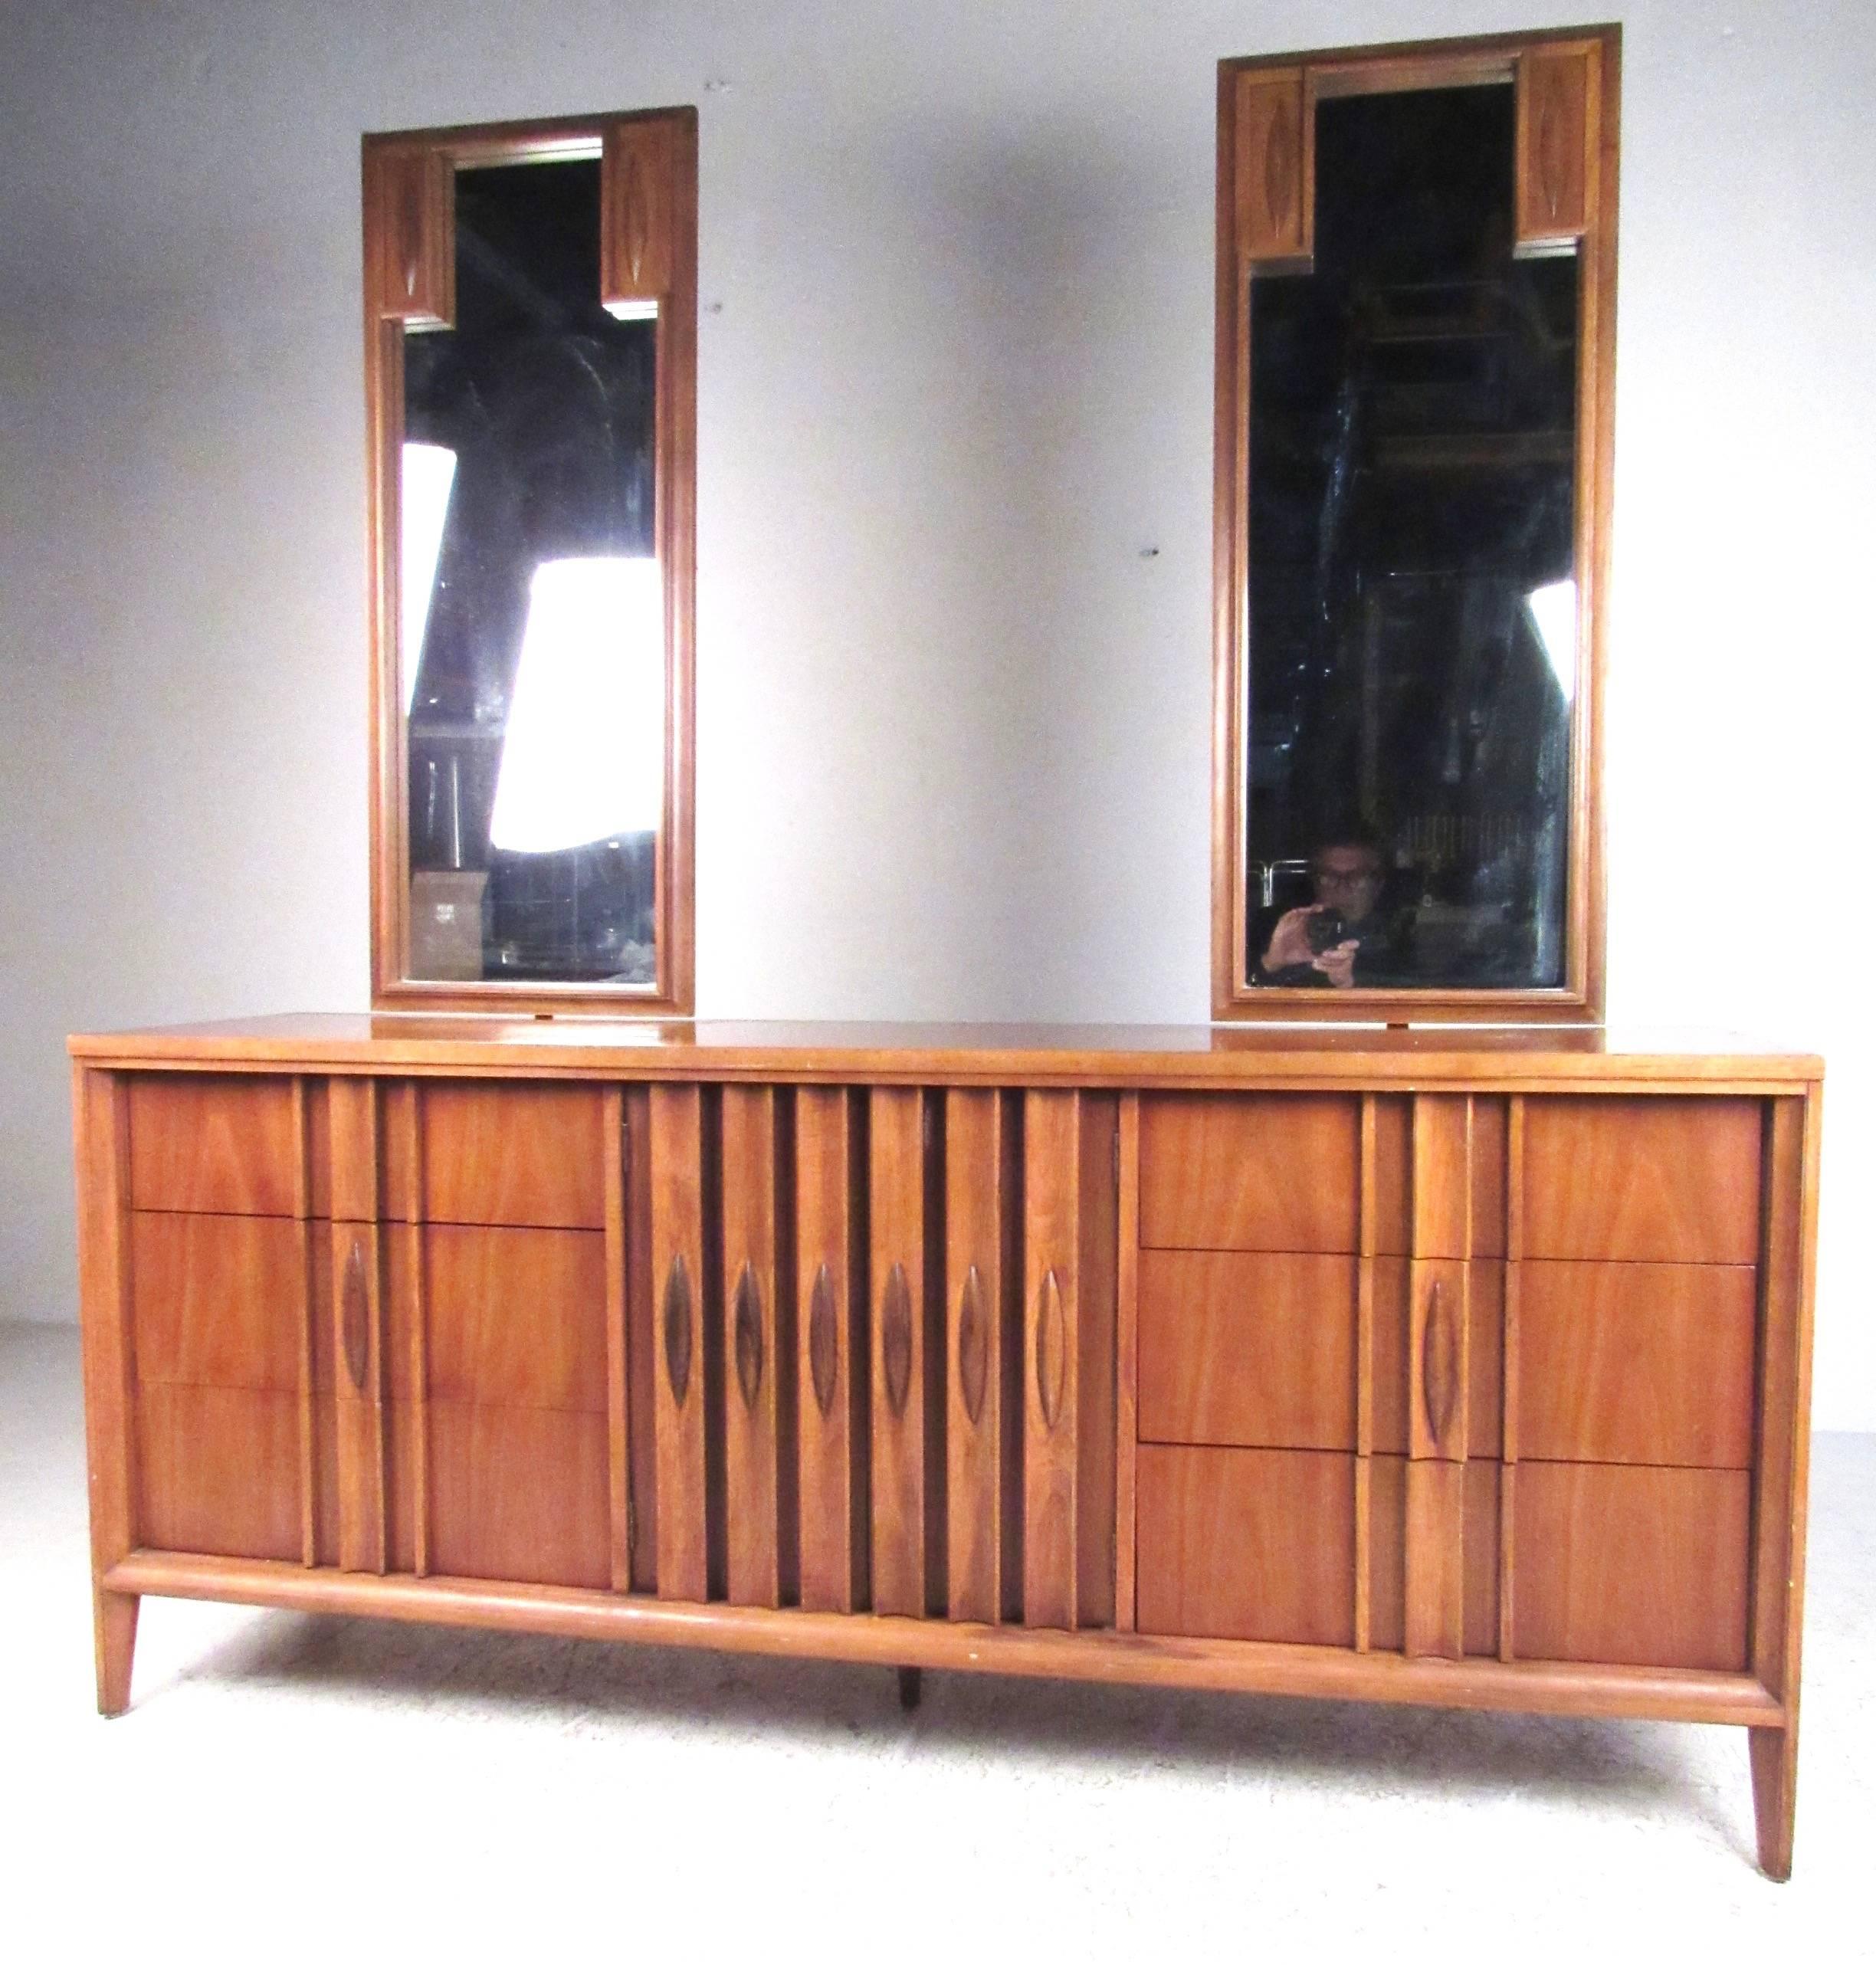 This beautiful six piece bedroom set features sculpted American modern design with unique handles. Matching suite offers plenty of storage space with highboy and lowboy, pair of nightstands, and two dressing mirrors. Unique midcentury design, please